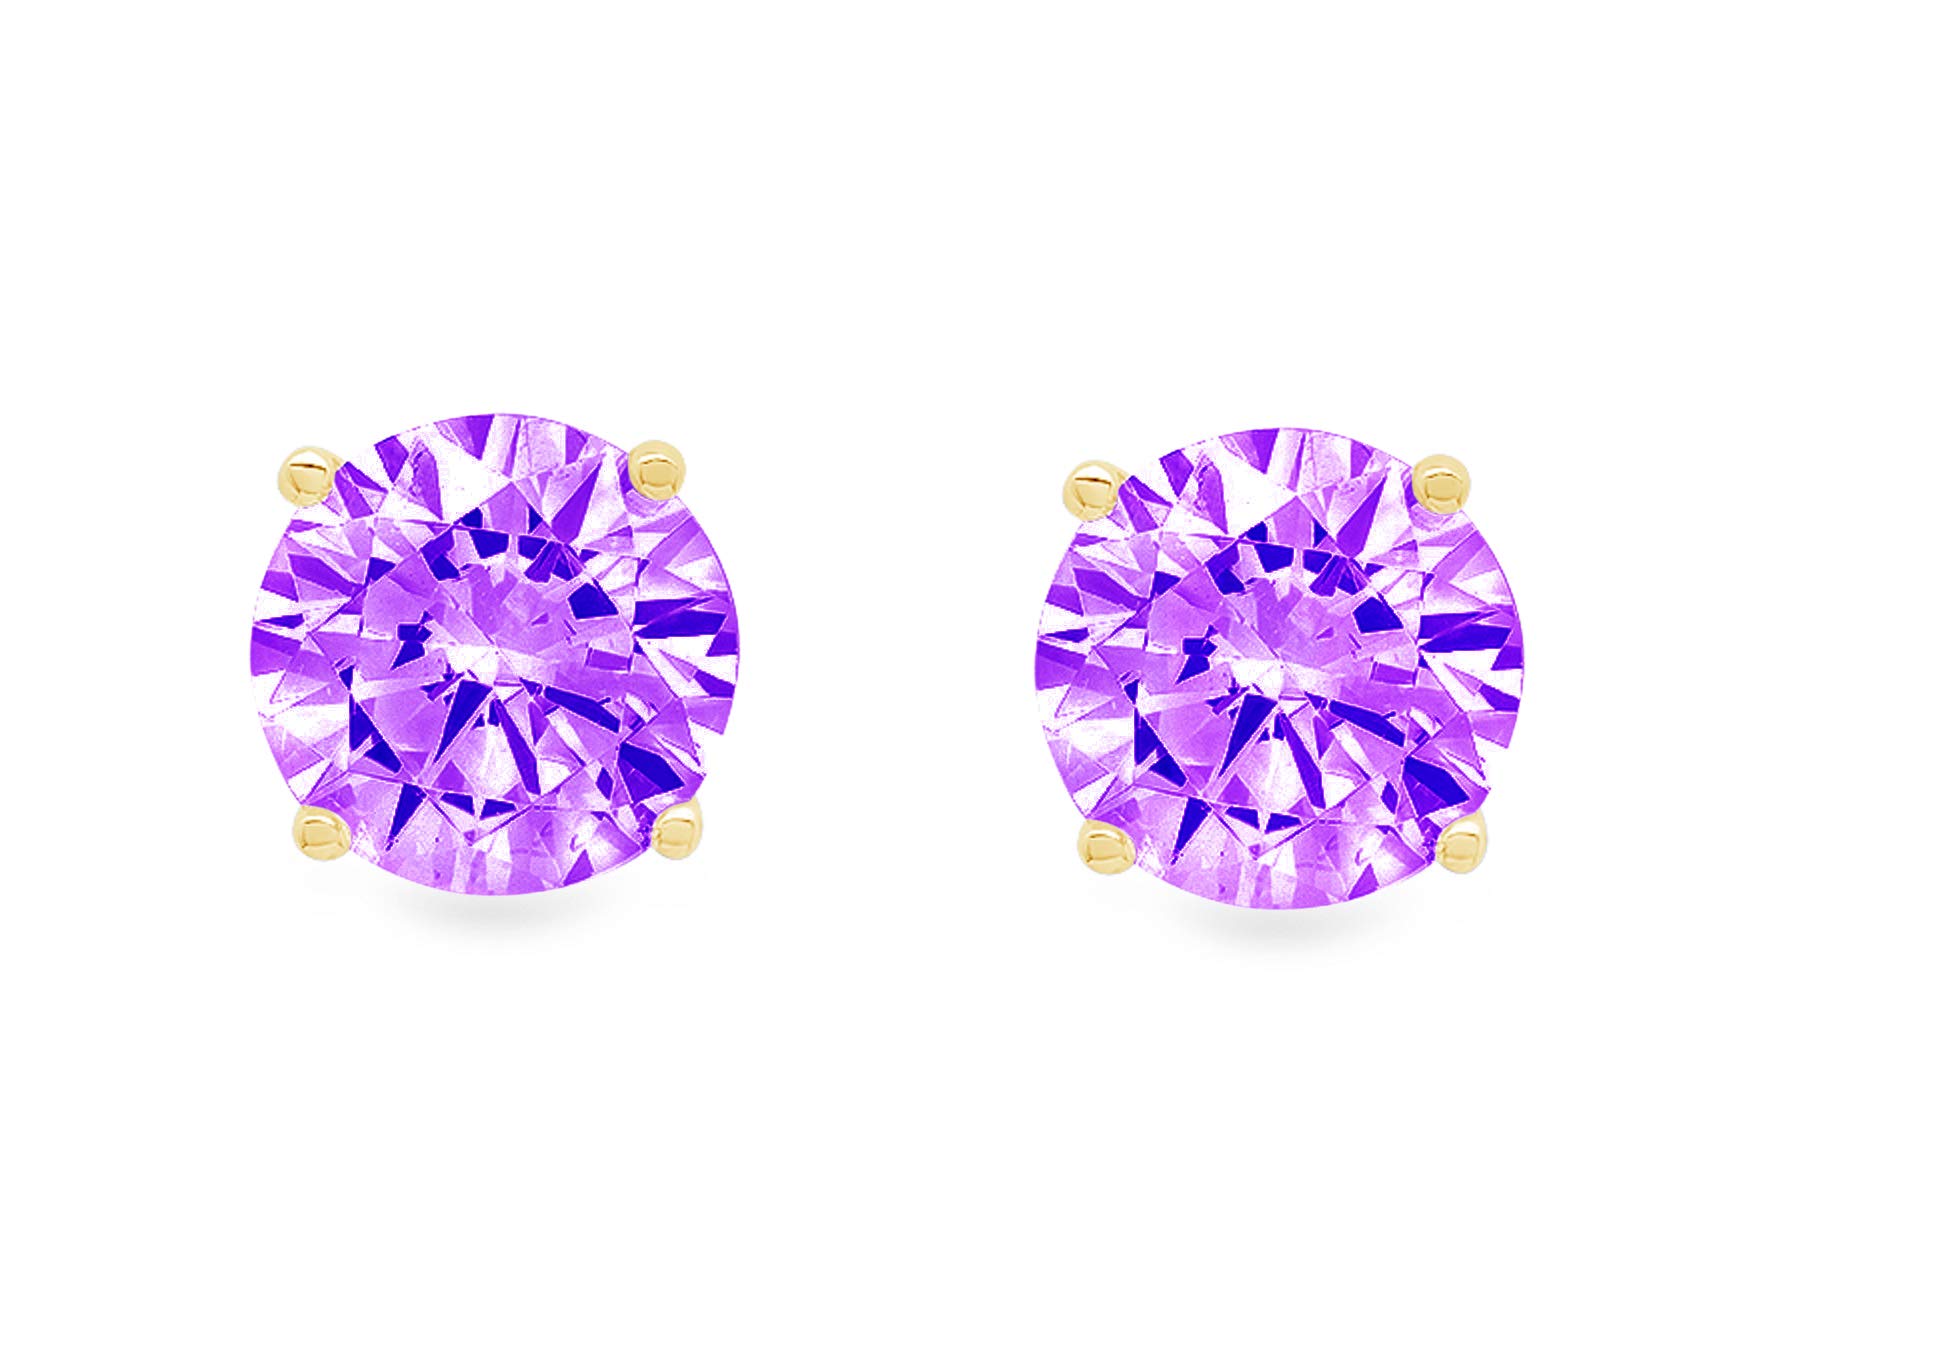 3.9ct Round Cut Solitaire Natural Purple Amethyst gemstone Unisex Designer Stud Earrings Solid 14k Yellow Gold Push Back conflict free Jewelry